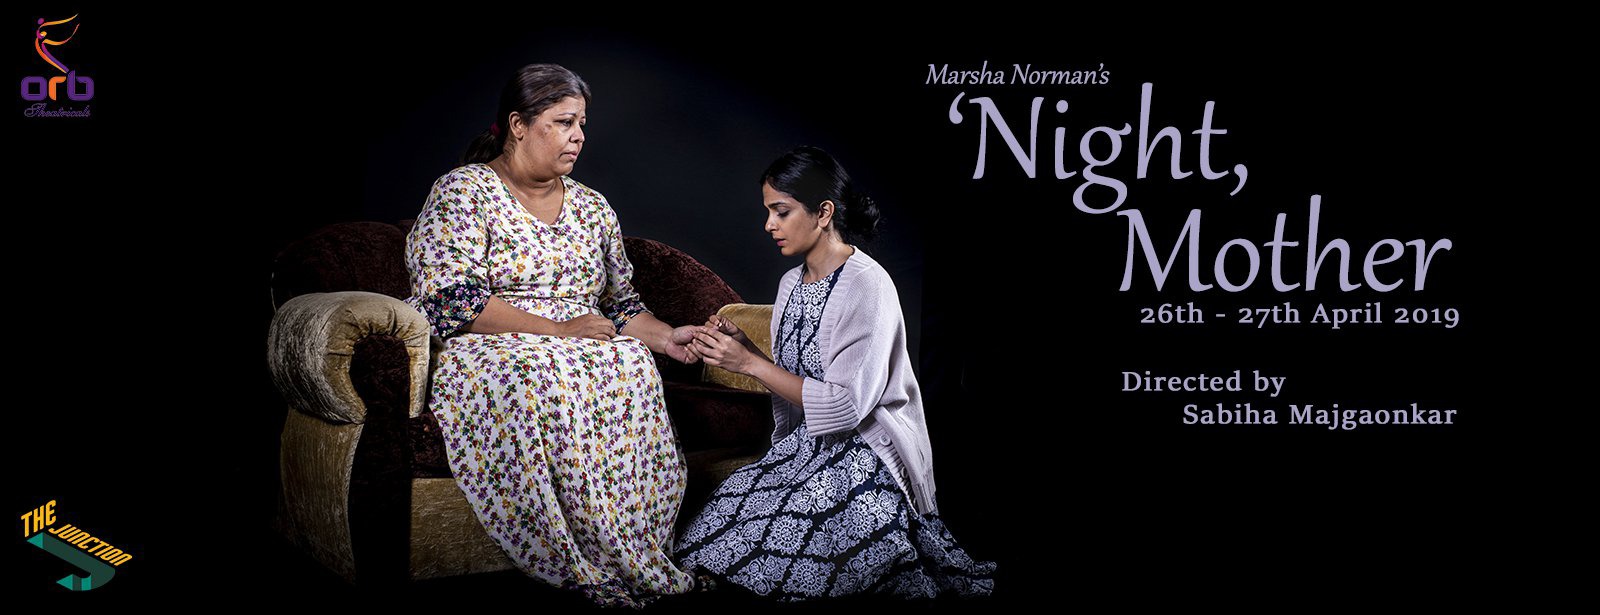 Night, Mother at The Junction - Coming Soon in UAE